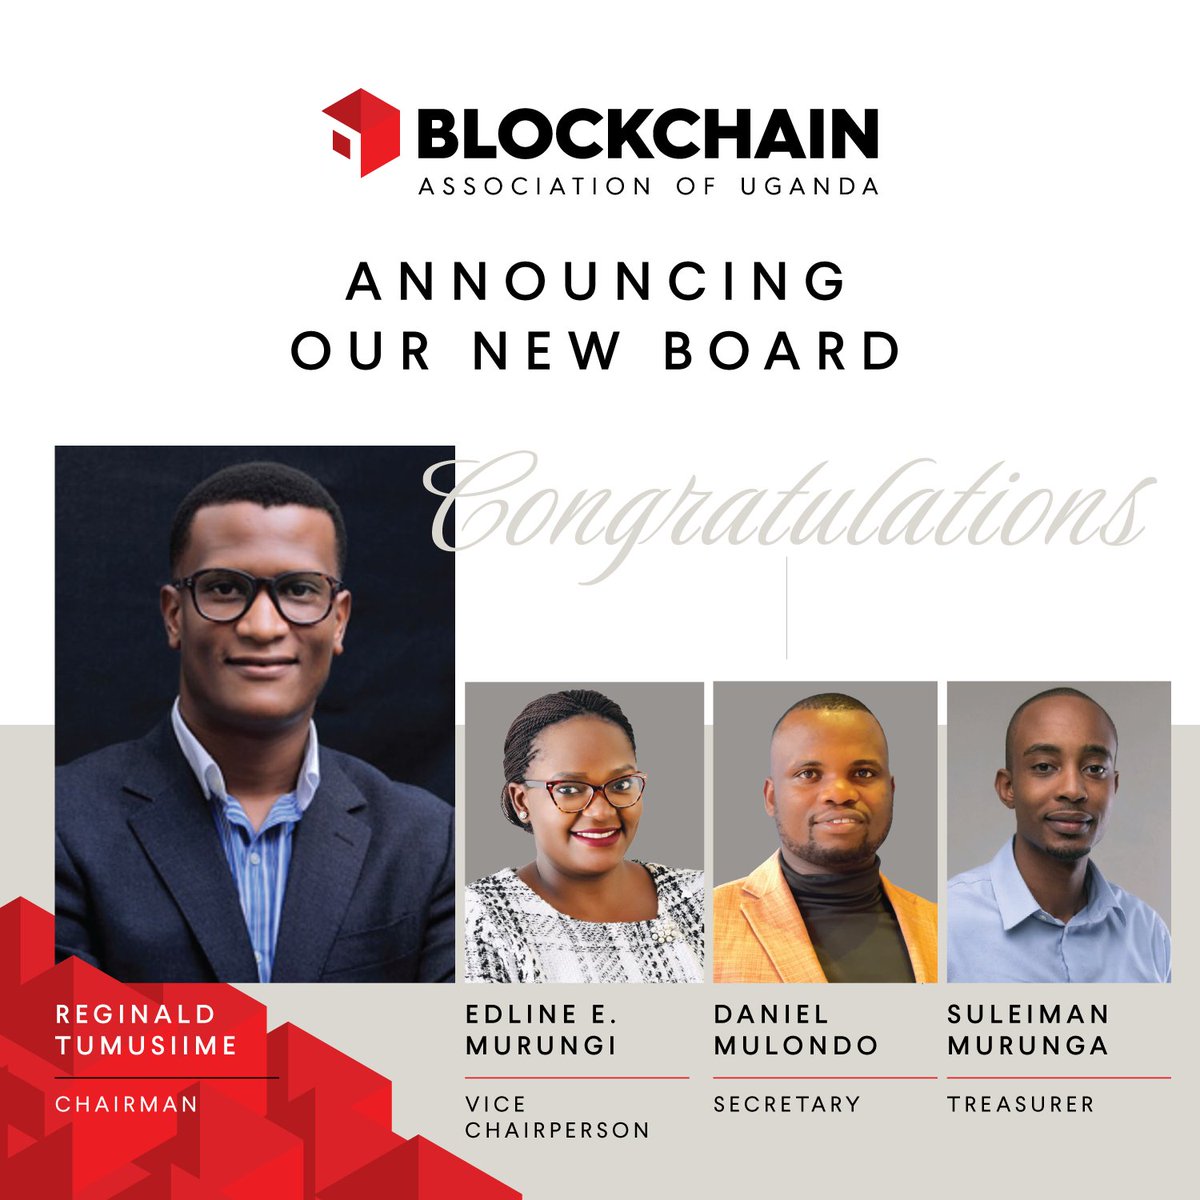 Congratulations to Chairman @ReggieBoss01 and the new board of @blockchainug. The new board takes on leadership at a time when Uganda’s innovation ecosystem is coming of age, which when harnessed, has the potential to transform our economy and lift our nation out of poverty.(1/2)